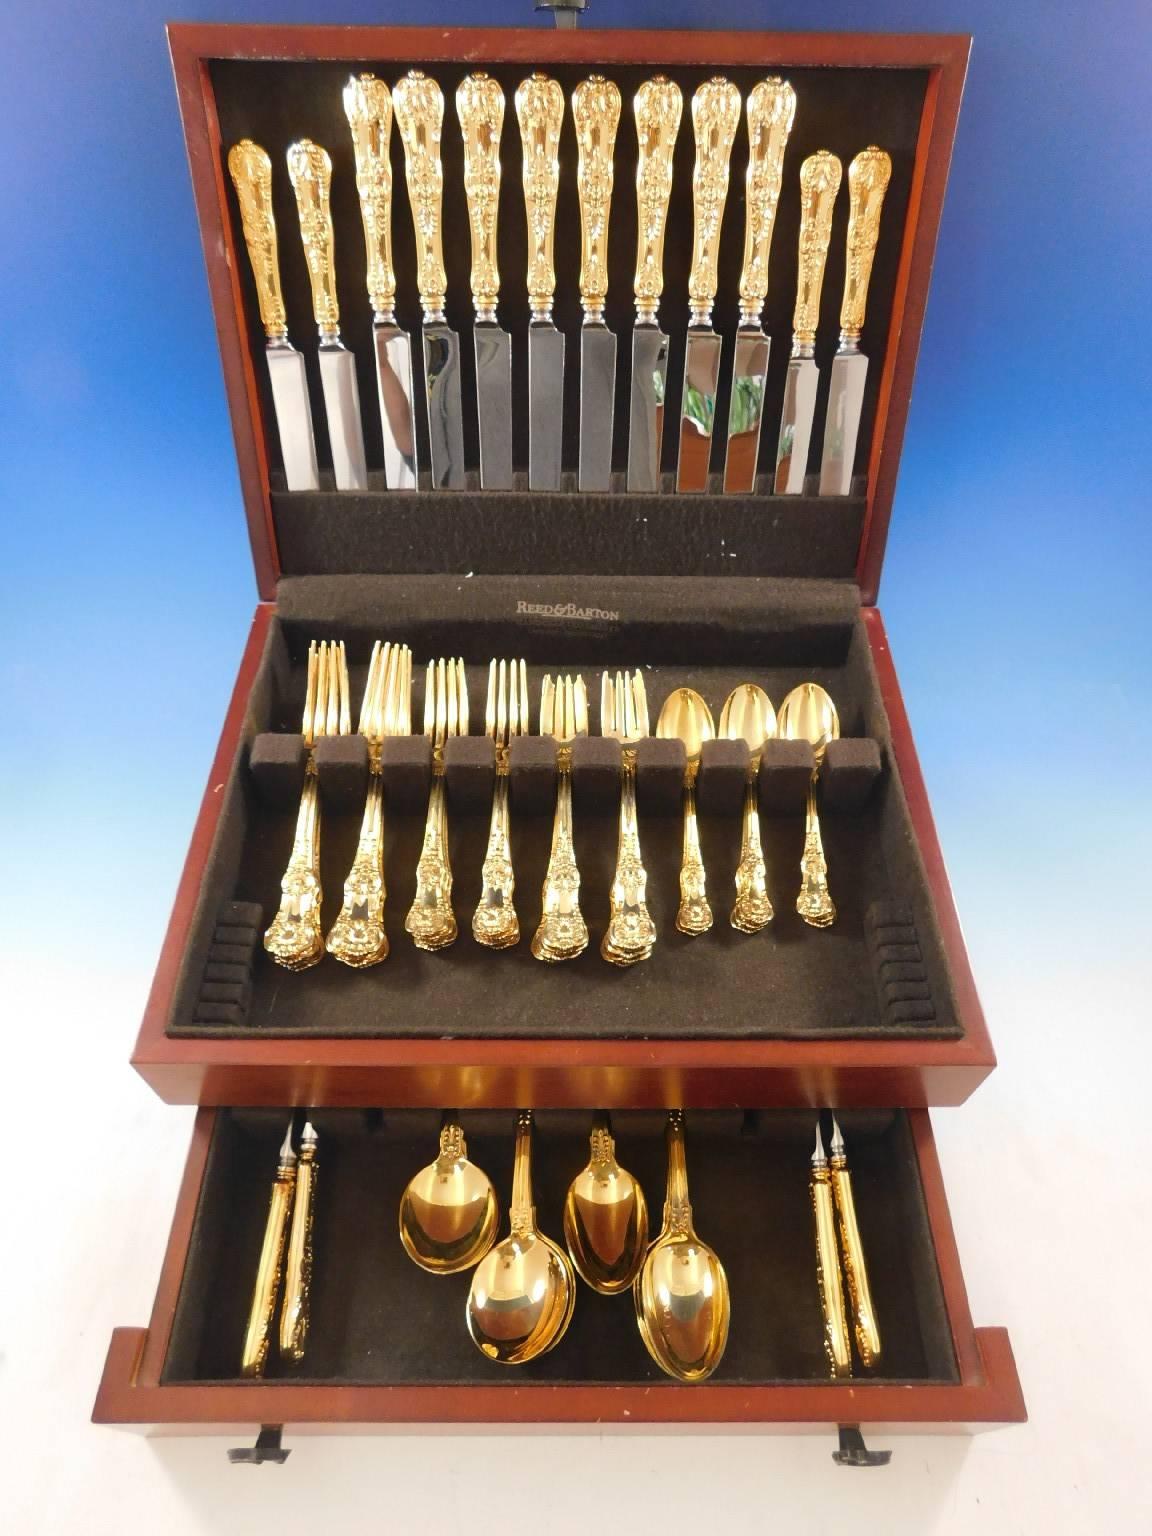 Outstanding English King Vermeil (completely gilded in 24-karat gold over sterling) by Tiffany sterling silver flatware set of 64 pieces. This set includes:

Eight dinner size knives, 10 1/4